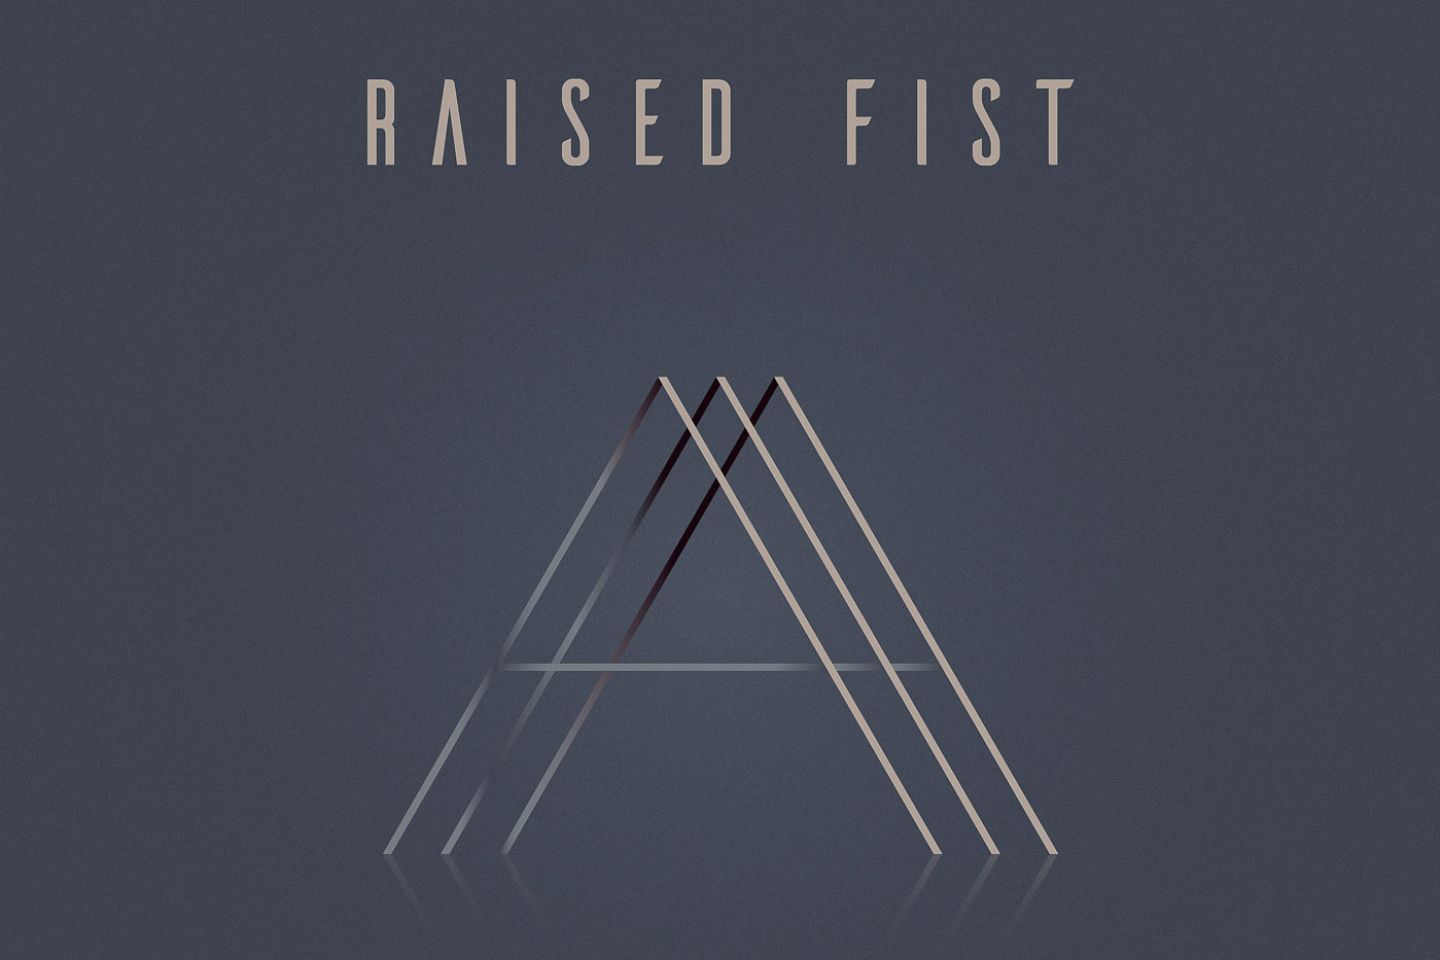 Raised Fist “Anthems” (Epitaph Records, 2019)